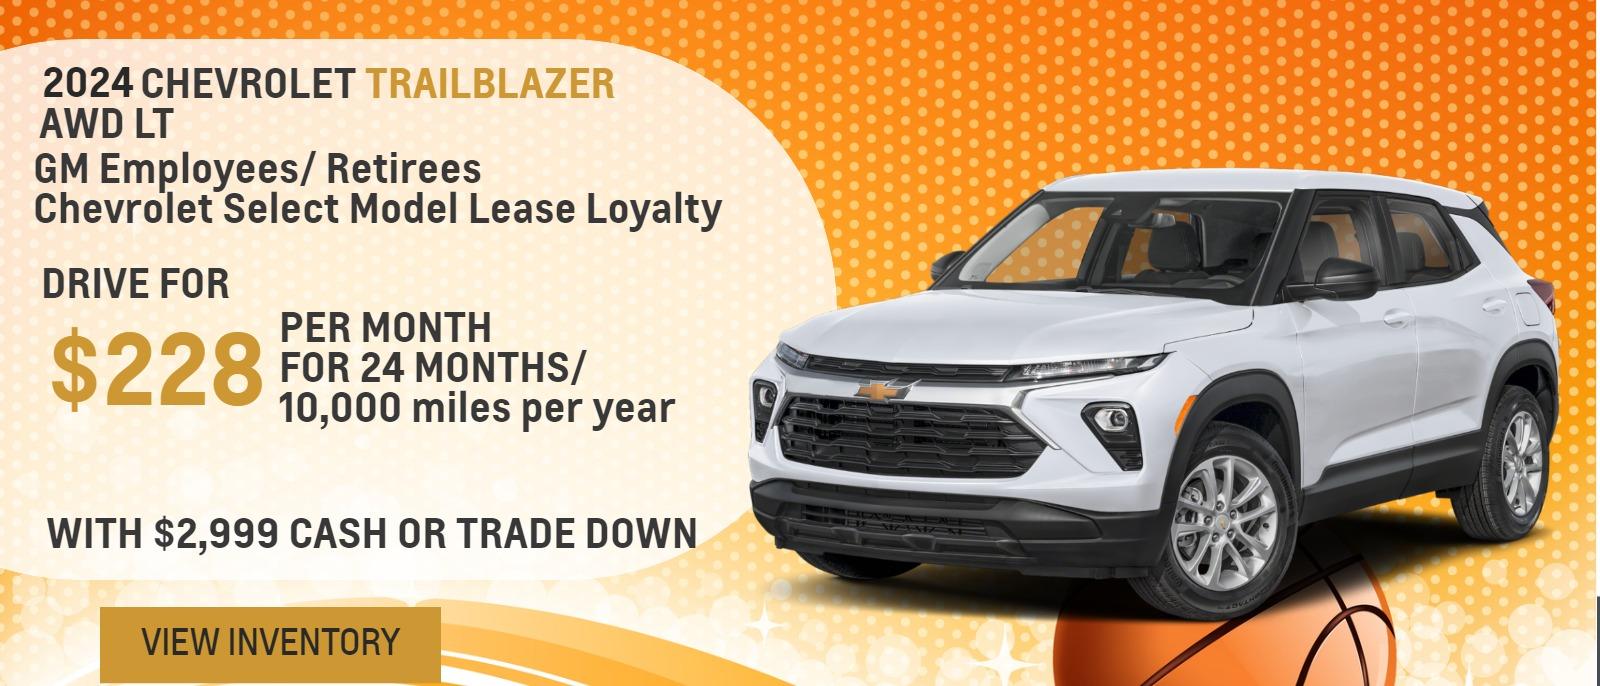 2024 Trailblazer AWD LT
GM Employees/ Retirees
Chevrolet Lease Loyalty

Drive for $228 per month
24 Months / 10,000 miles per year
With $2,999 cash or trade down